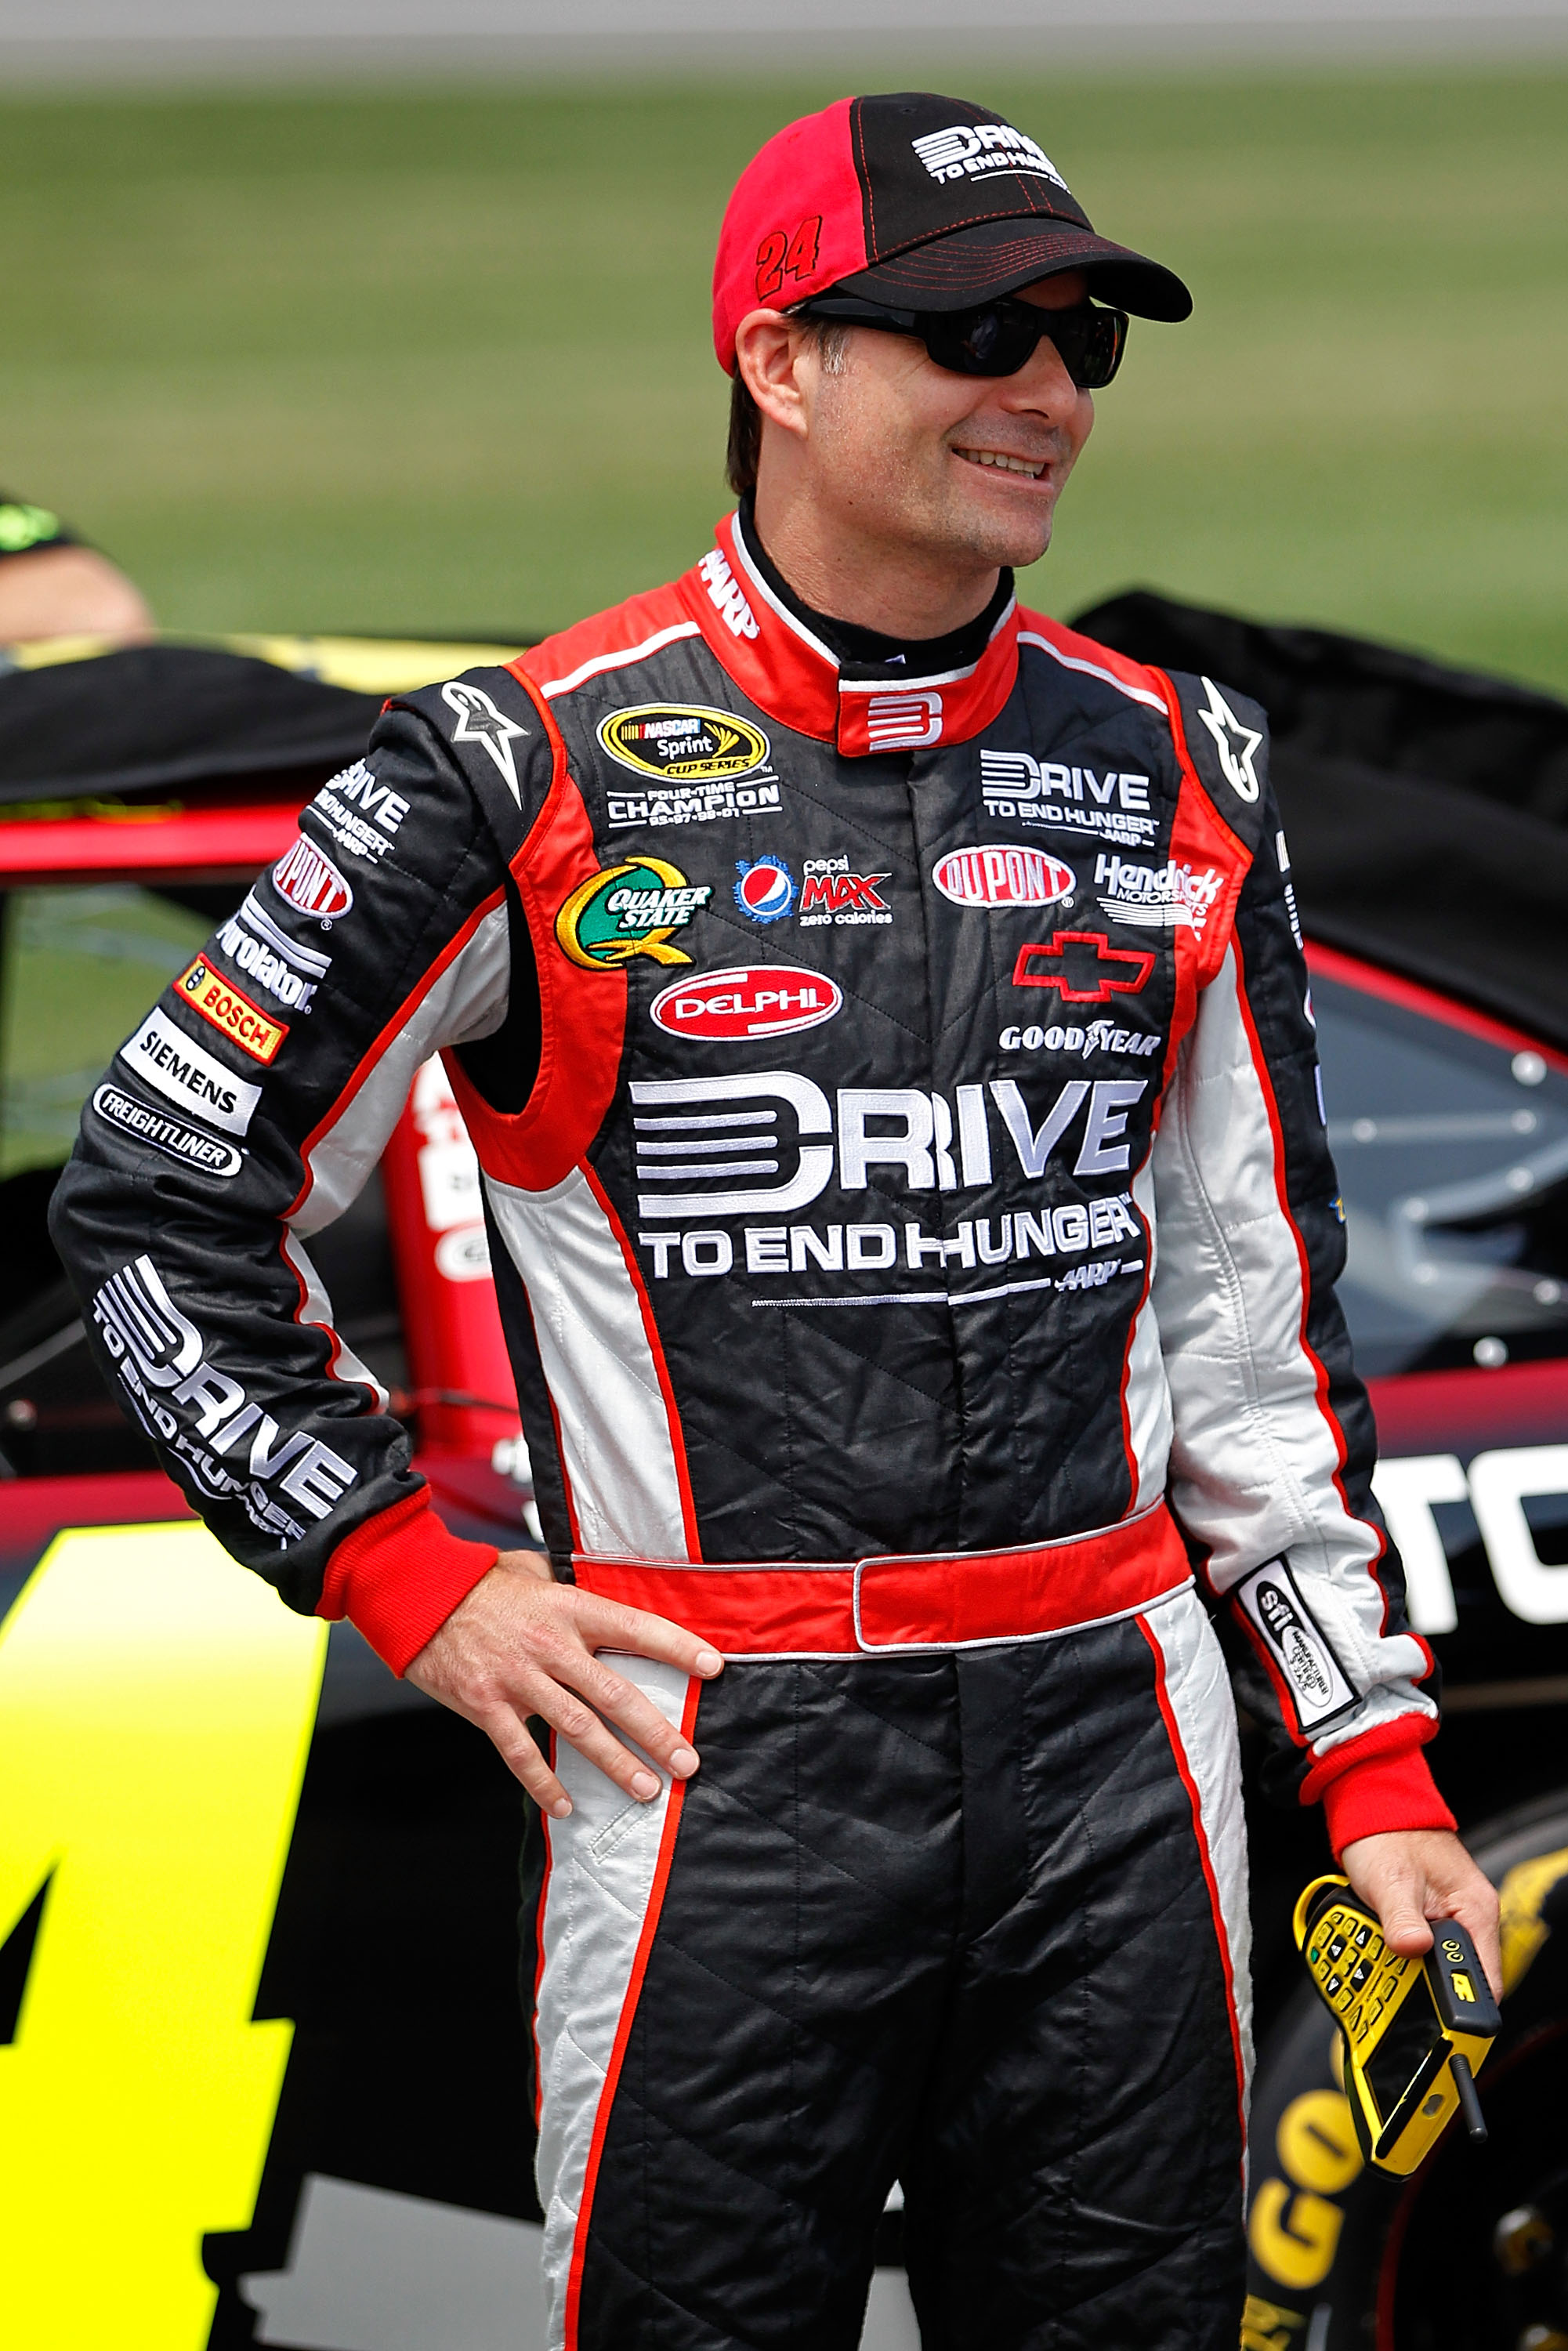 KANSAS CITY, KS - JUNE 04:  Jeff Gordon, driver of the #24 Drive to End Hunger Chevrolet, stands on the grid during qualifying for the NASCAR Sprint Cup Series STP 400 at Kansas Speedway on June 4, 2011 in Kansas City, Kansas.  (Photo by Geoff Burke/Getty